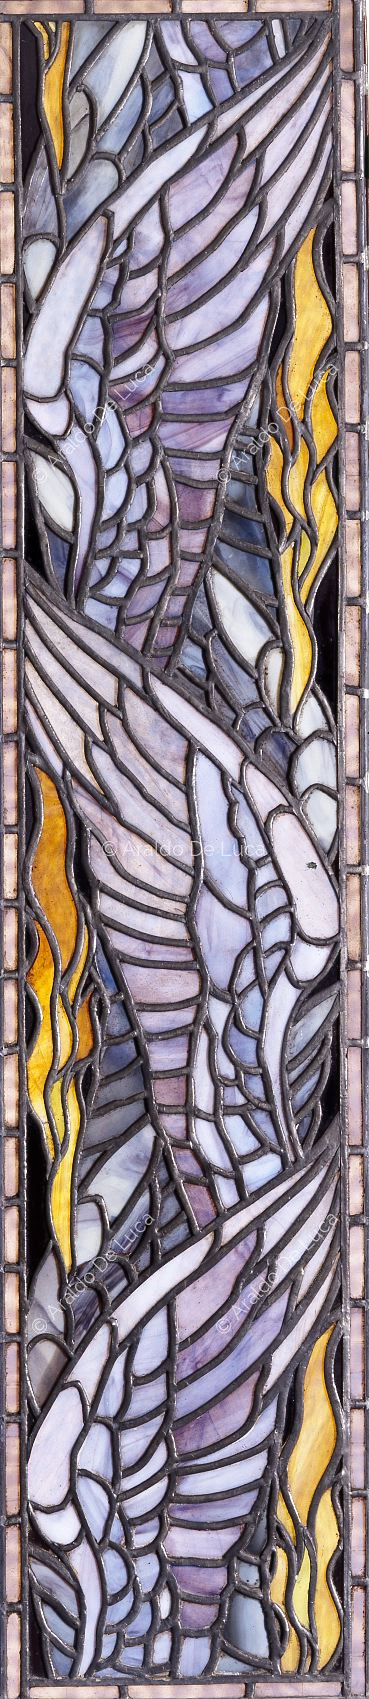 Stained-glass window with geometric motif and wings